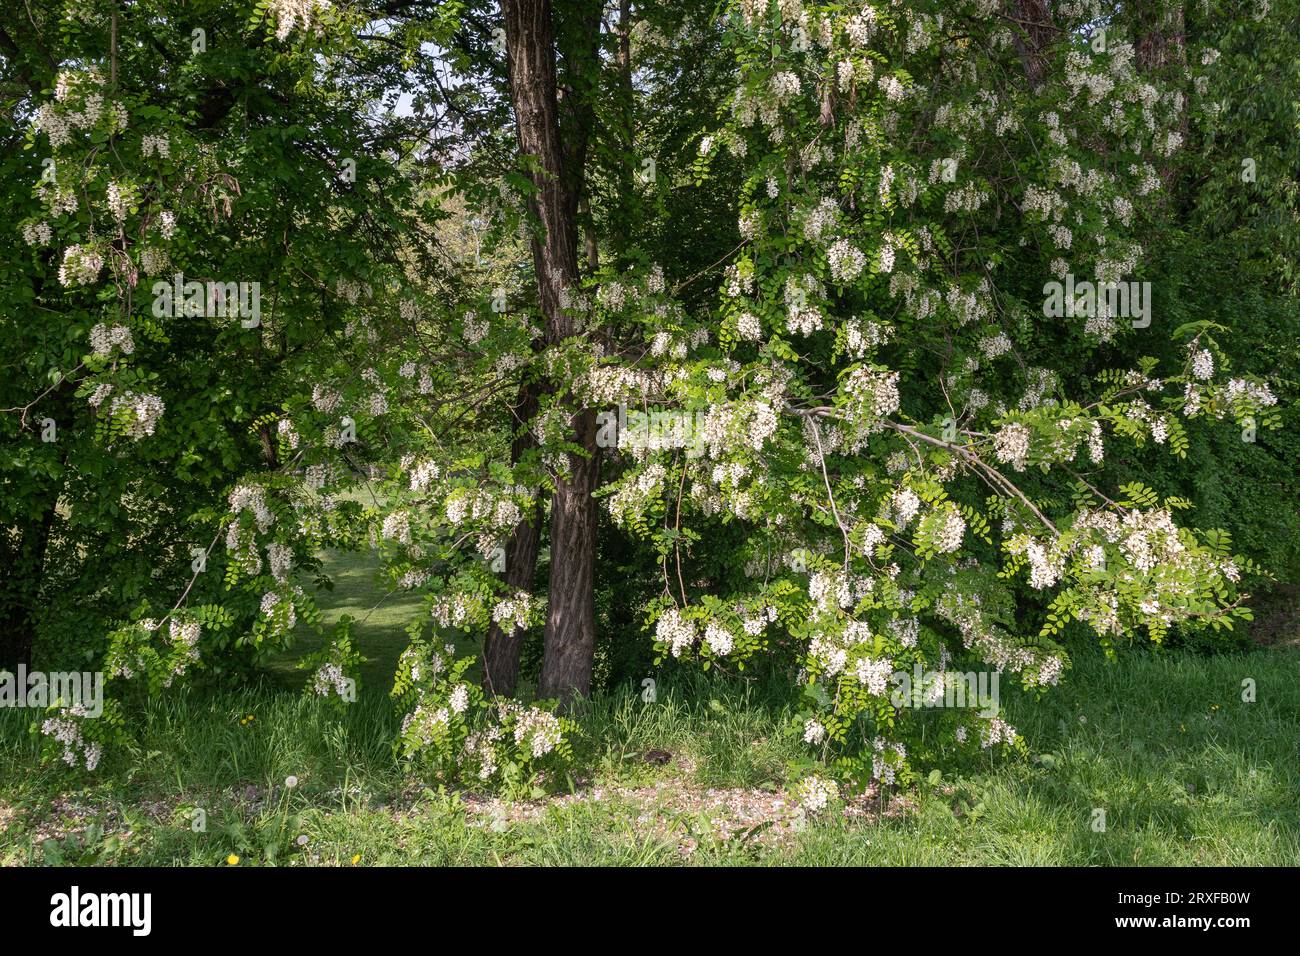 Flowering Robinia pseudoacacia (black locust or false acacia), deciduous tree of the legume family Fabaceae, with white flowers in spring, Italy Stock Photo